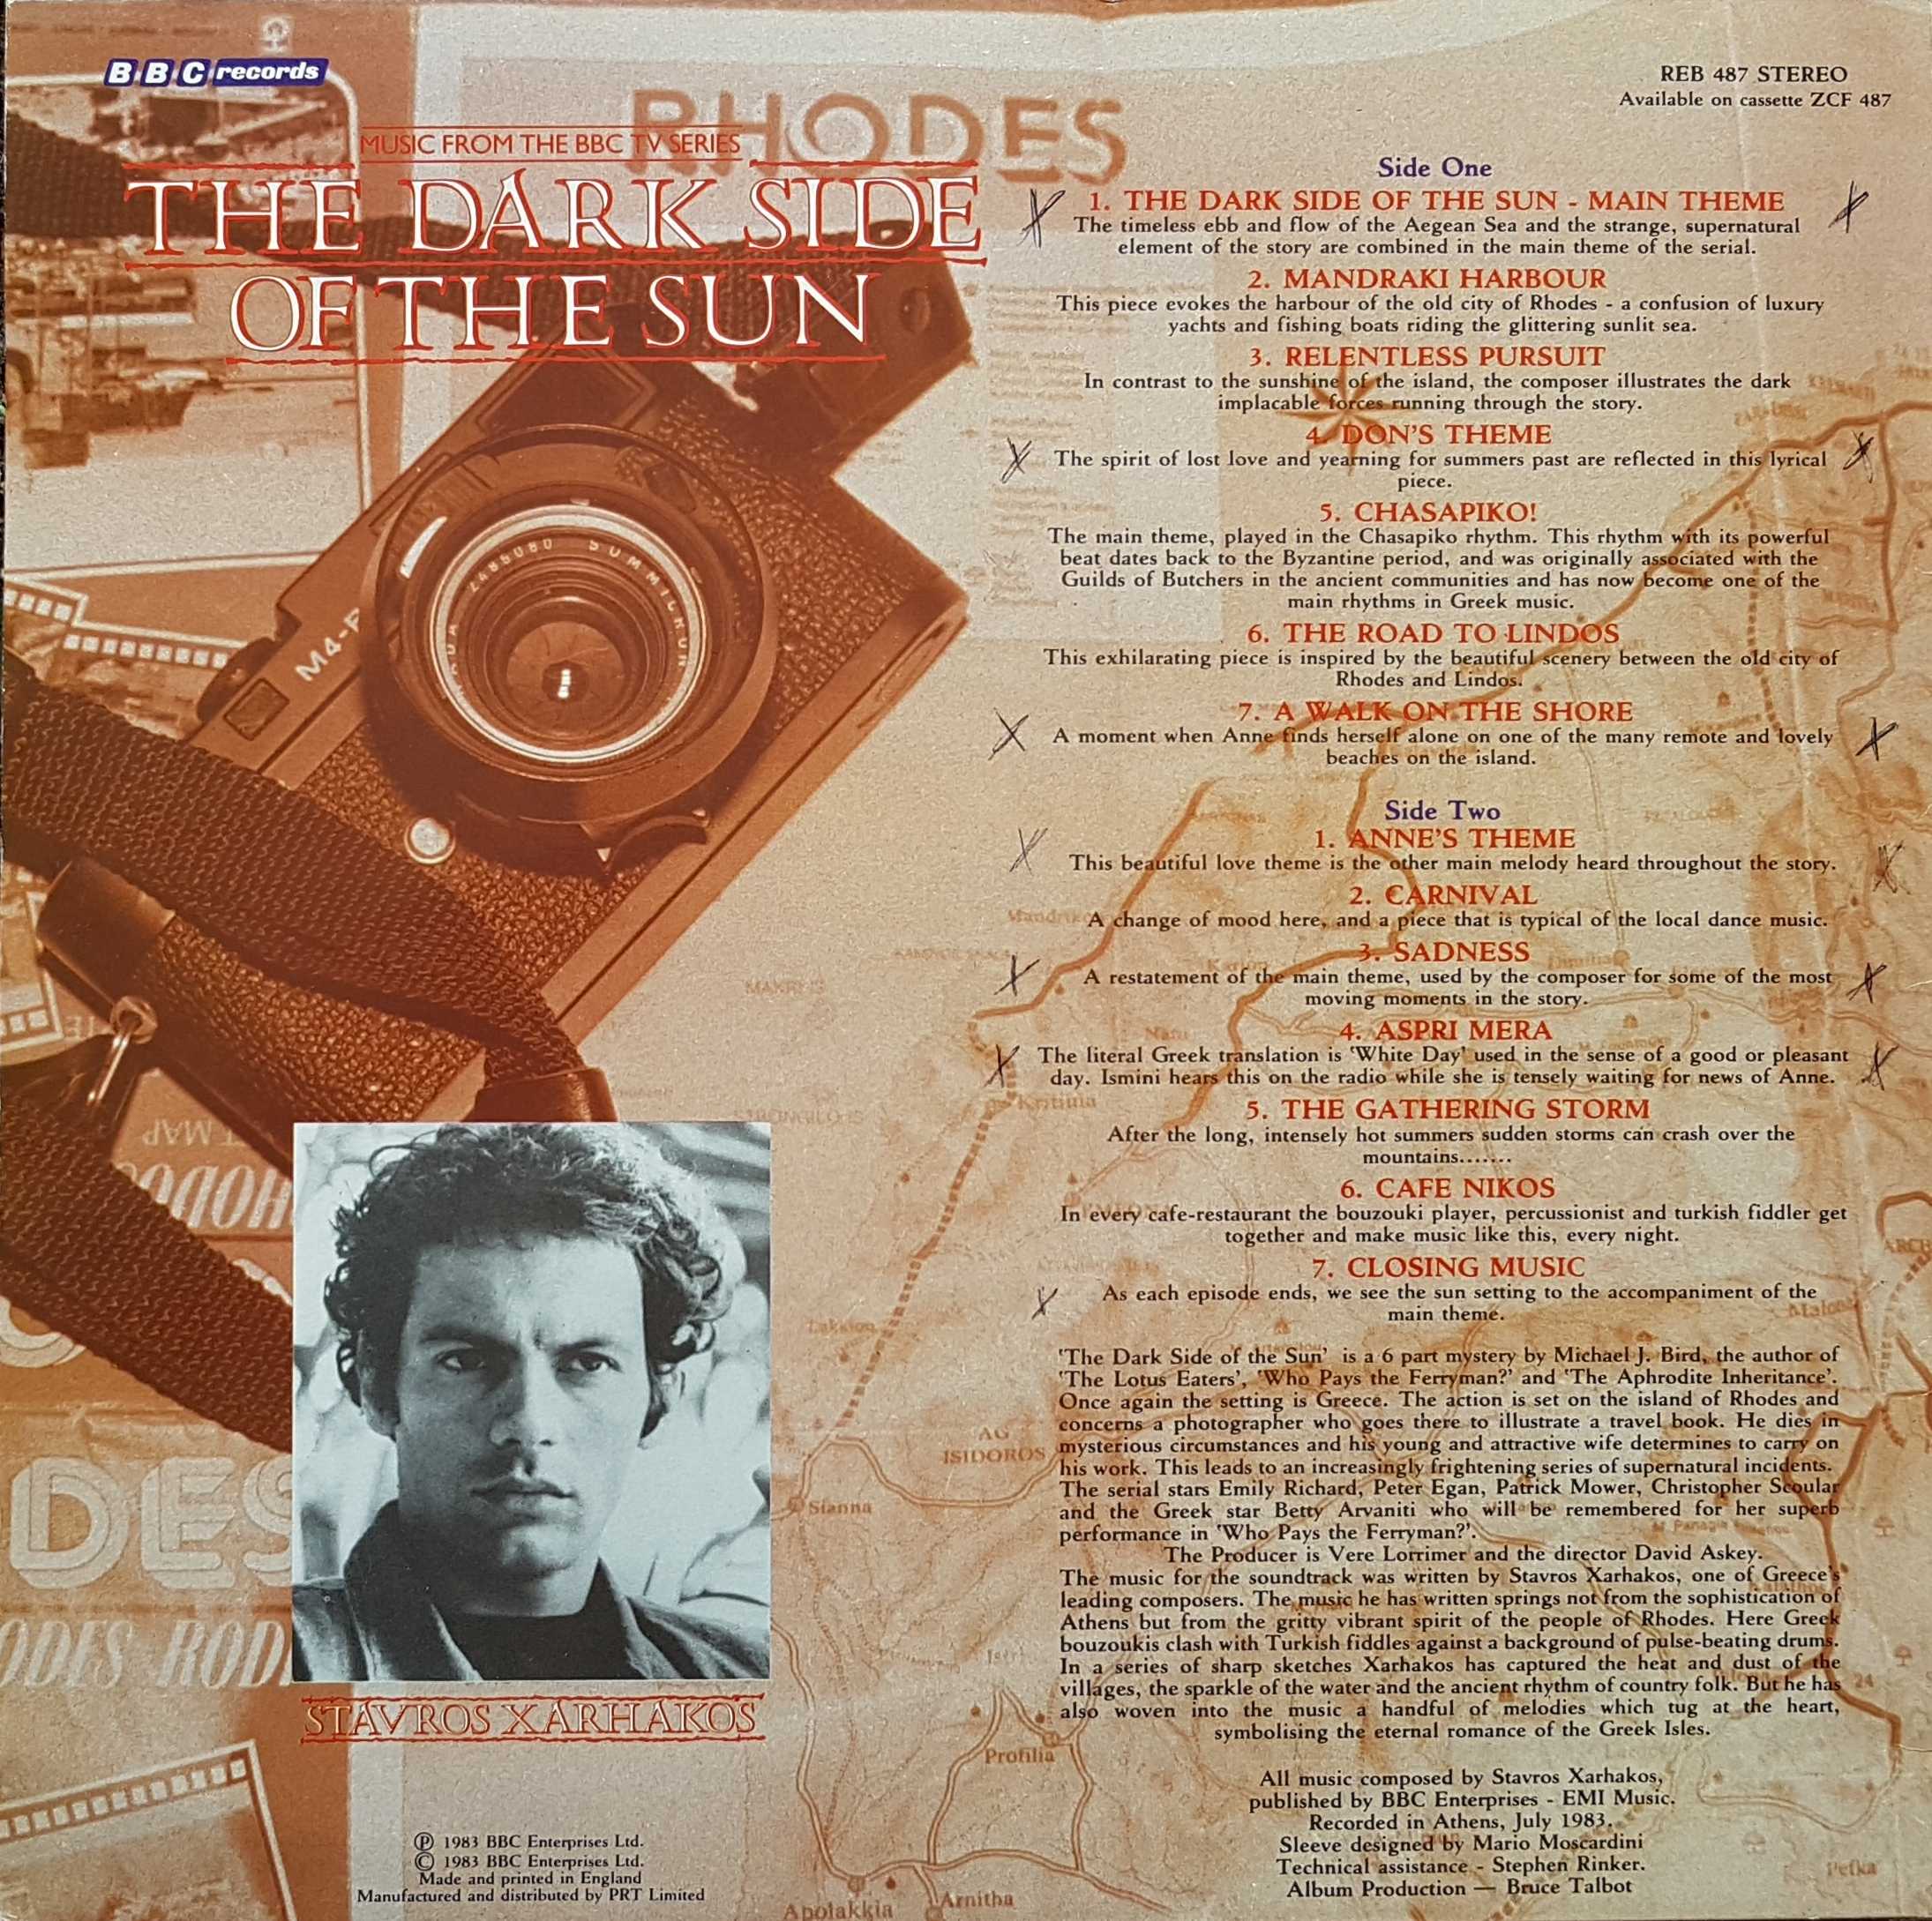 Picture of REB 487 The dark side of the Sun by artist Stavros Xarhakos from the BBC records and Tapes library